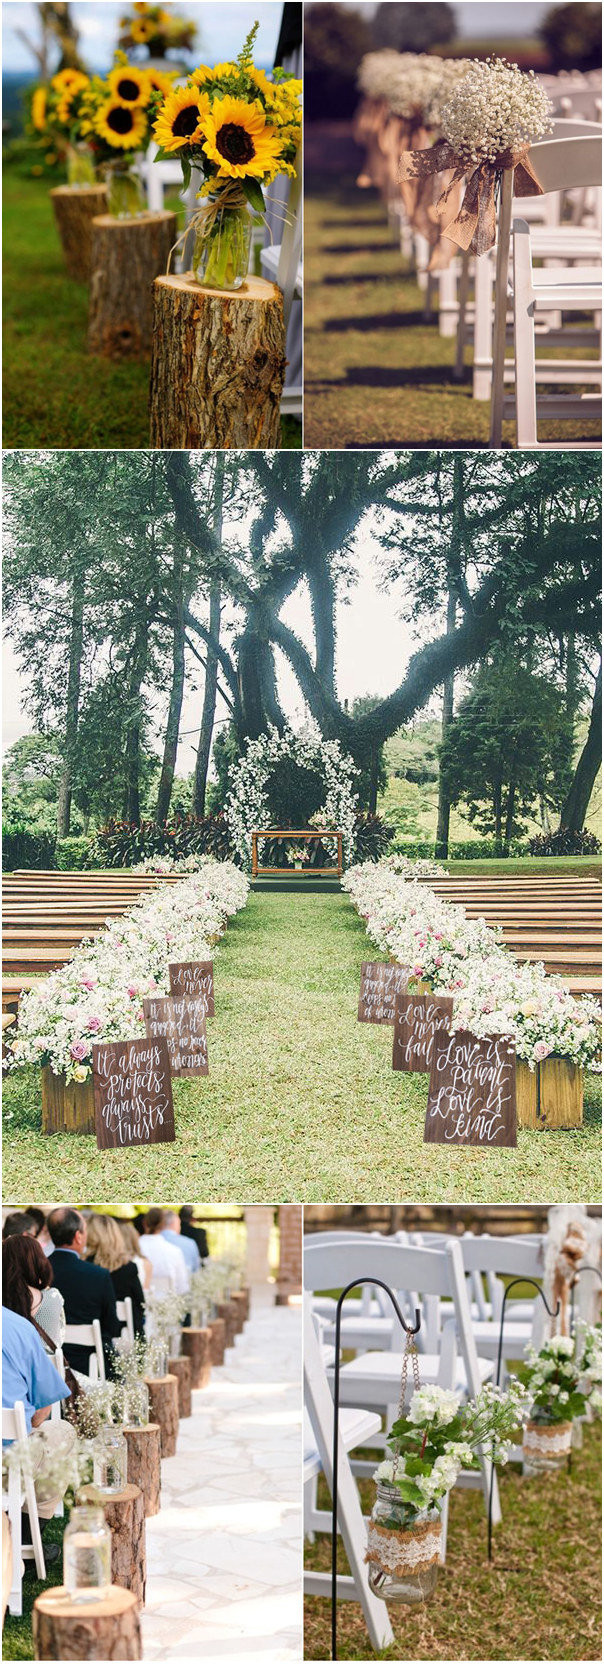 Country Weddings Decorations
 32 Rustic Wedding Decoration Ideas to Inspire Your Big Day